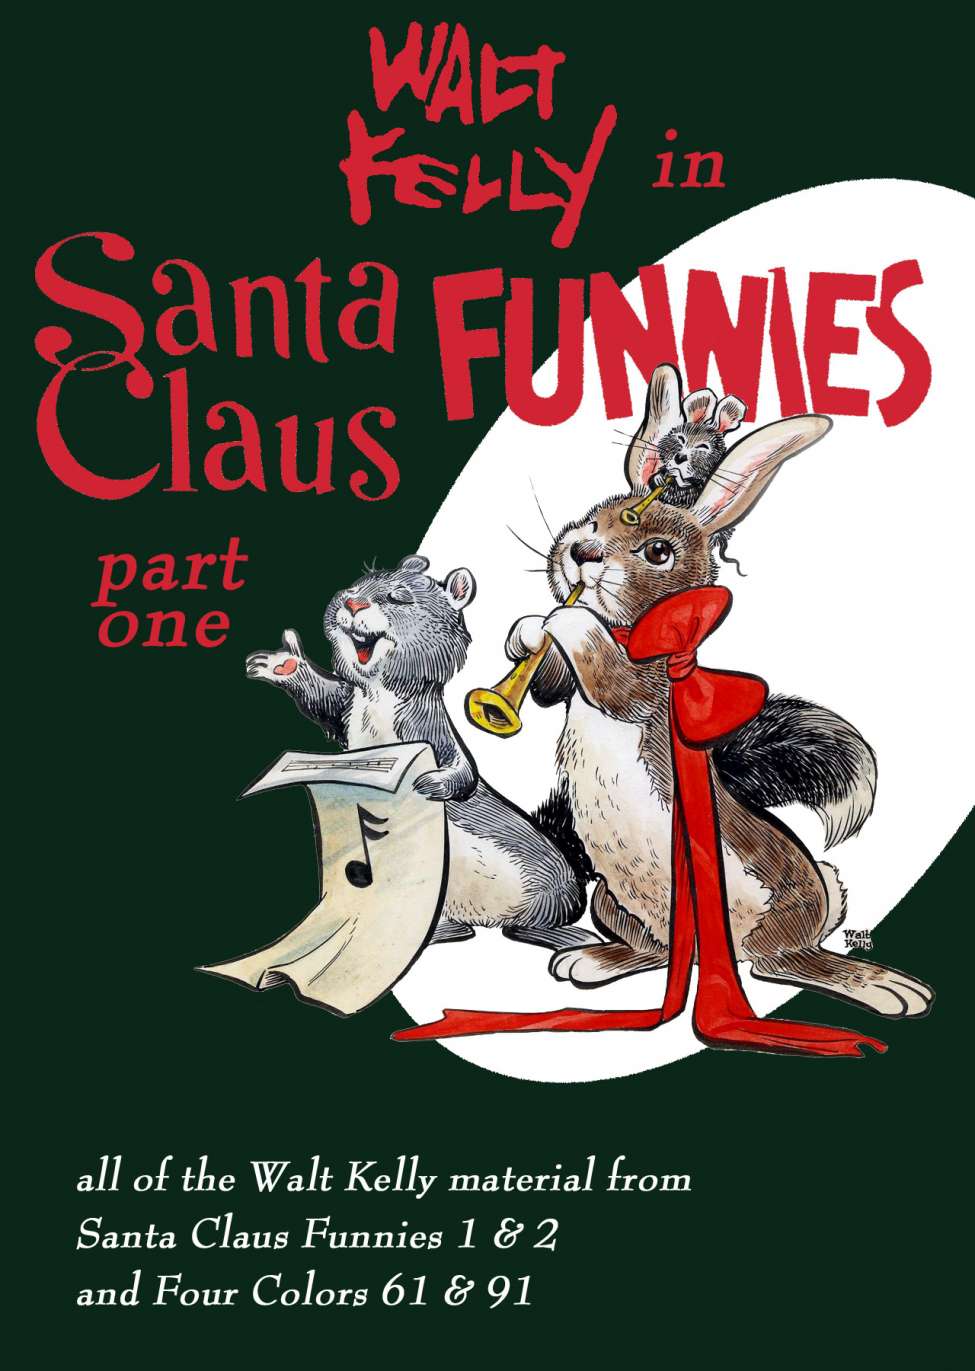 Book Cover For Walt Kelly in Santa Claus Funnies 1942-1949 - Part 1